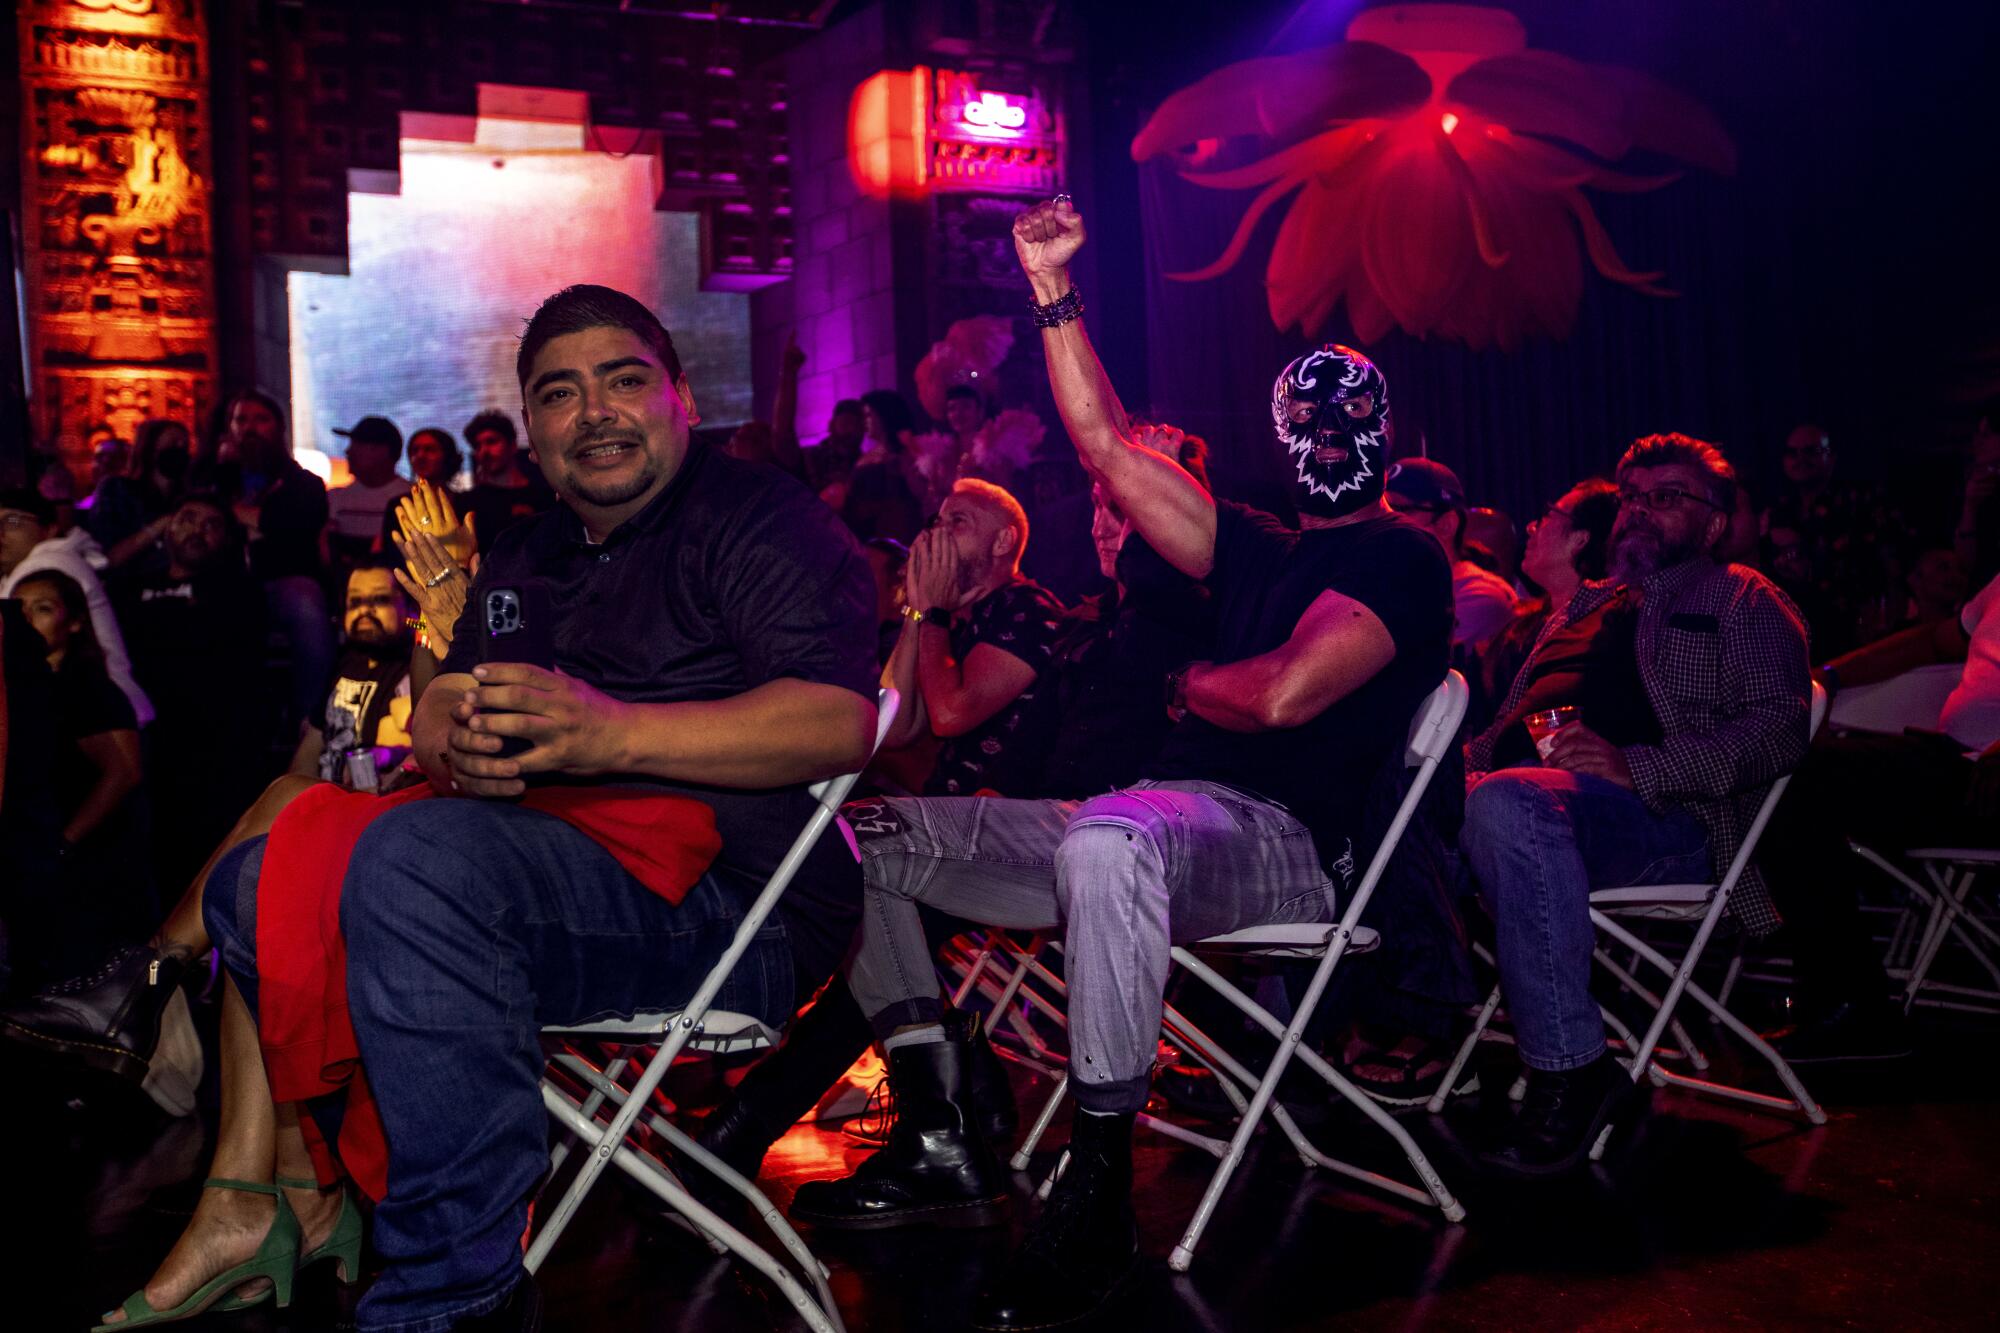 Fans cheer for their favorites at Lucha Vavoom